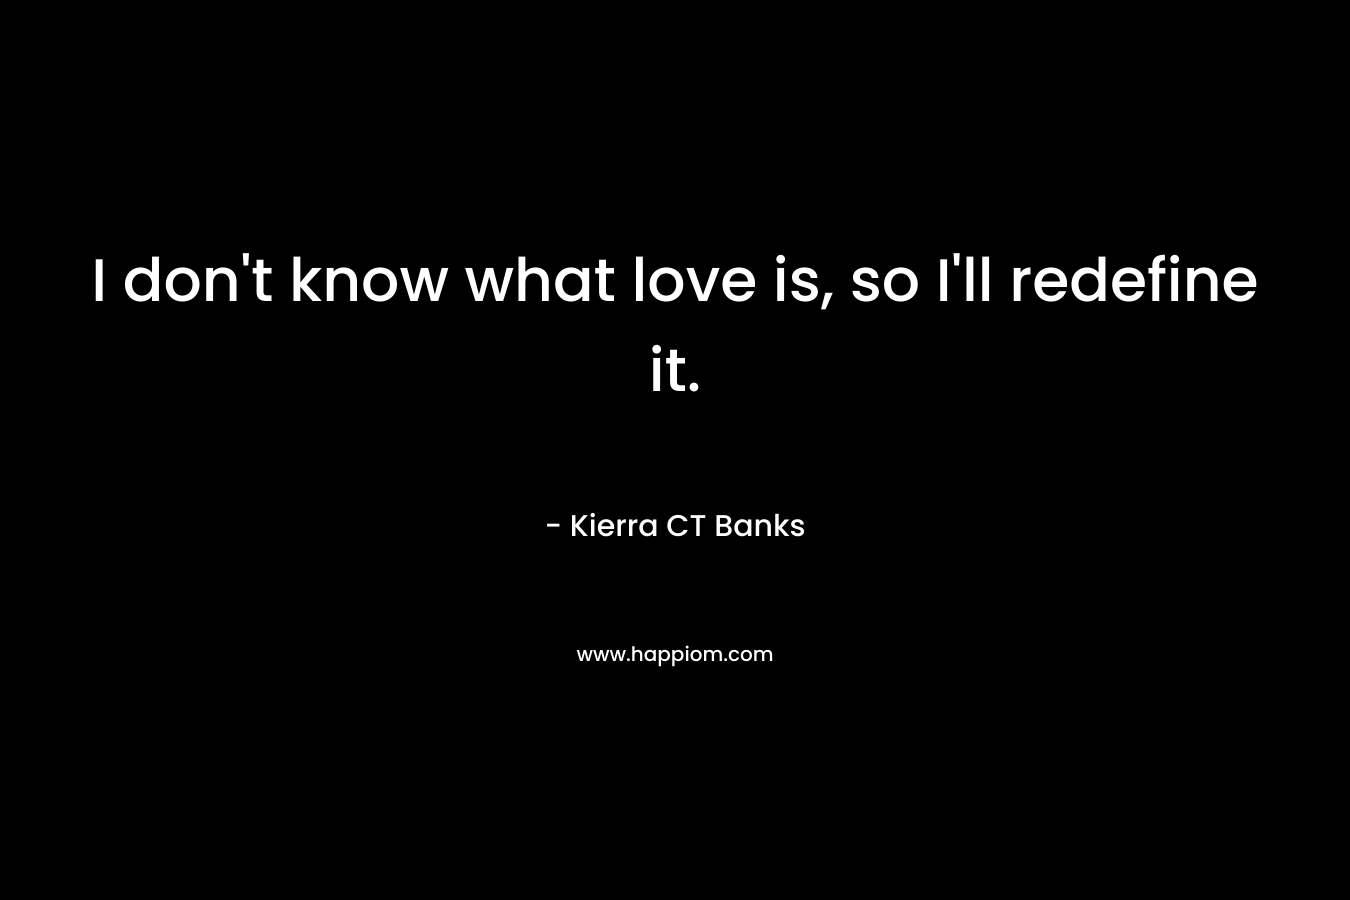 I don't know what love is, so I'll redefine it.